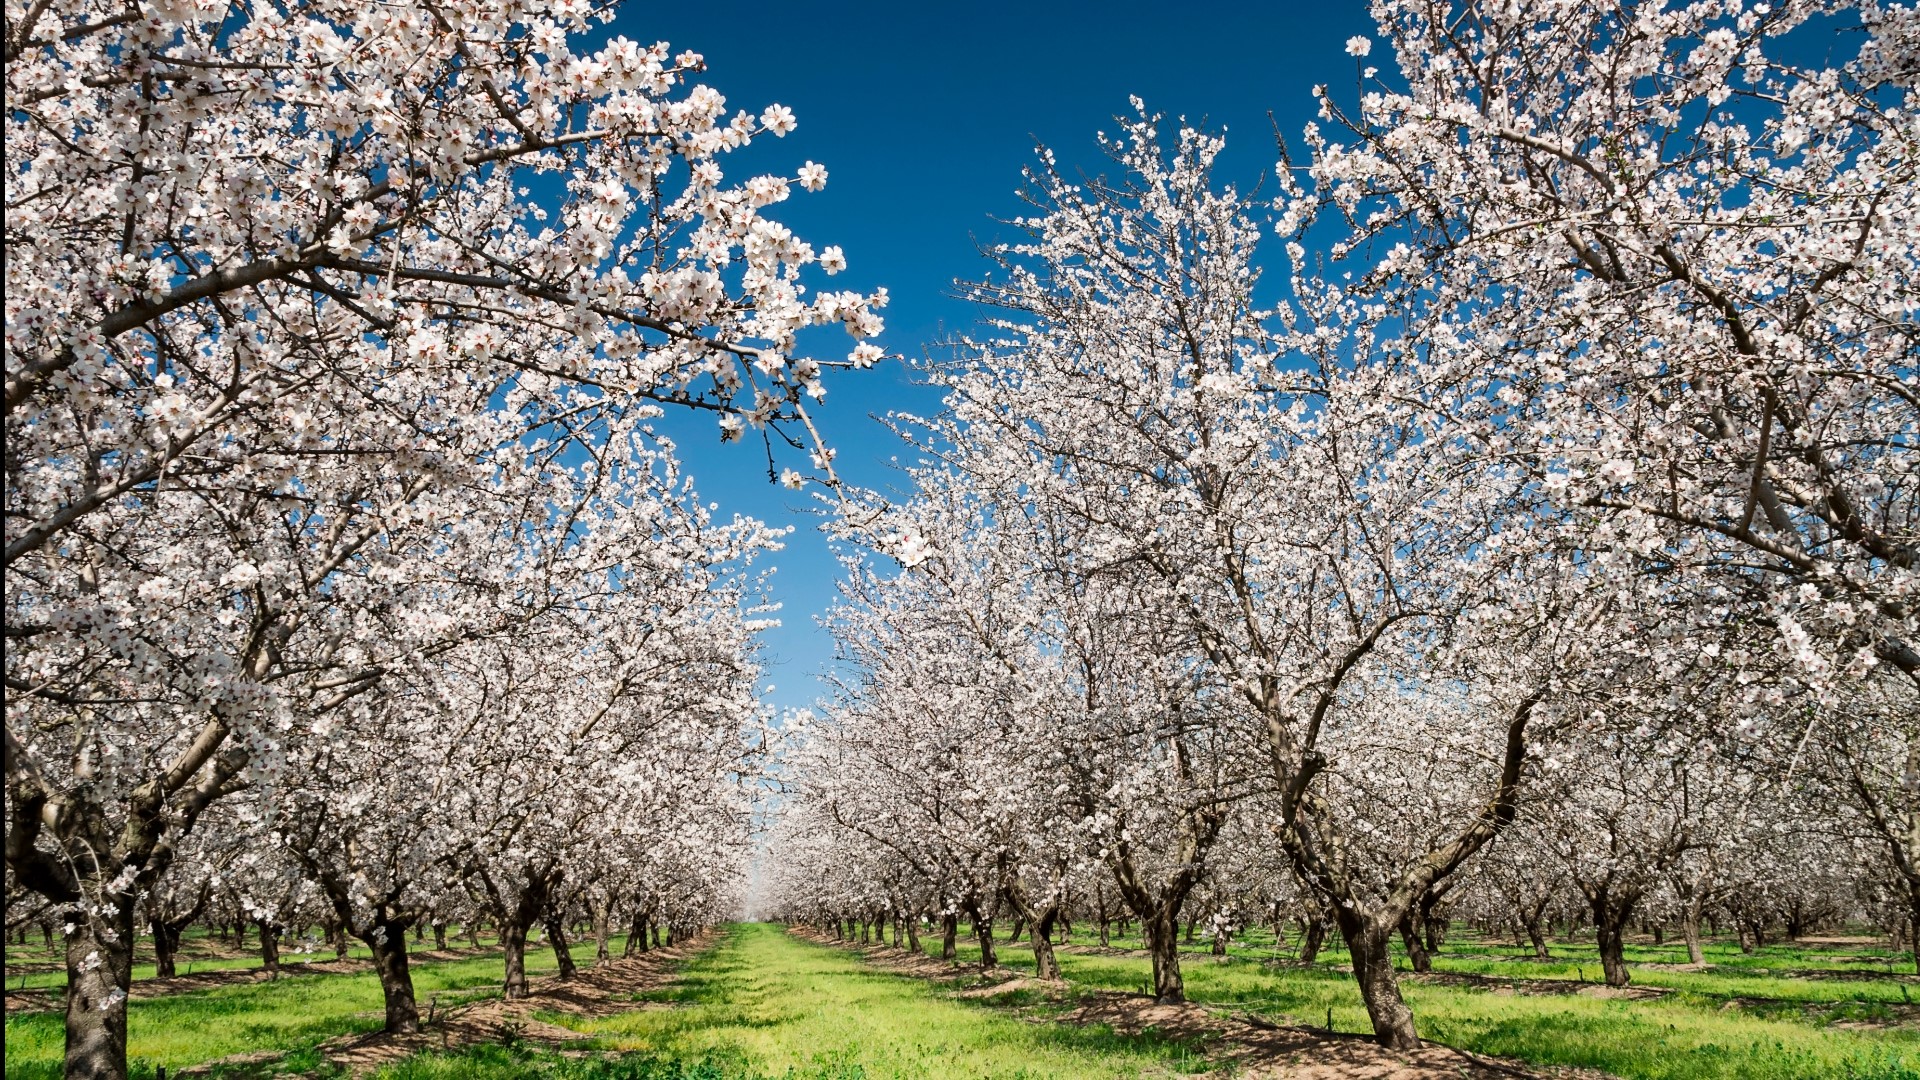 The Ripon Almond Blossom Festival attracts more than twice the population of the small town every year for the festival.